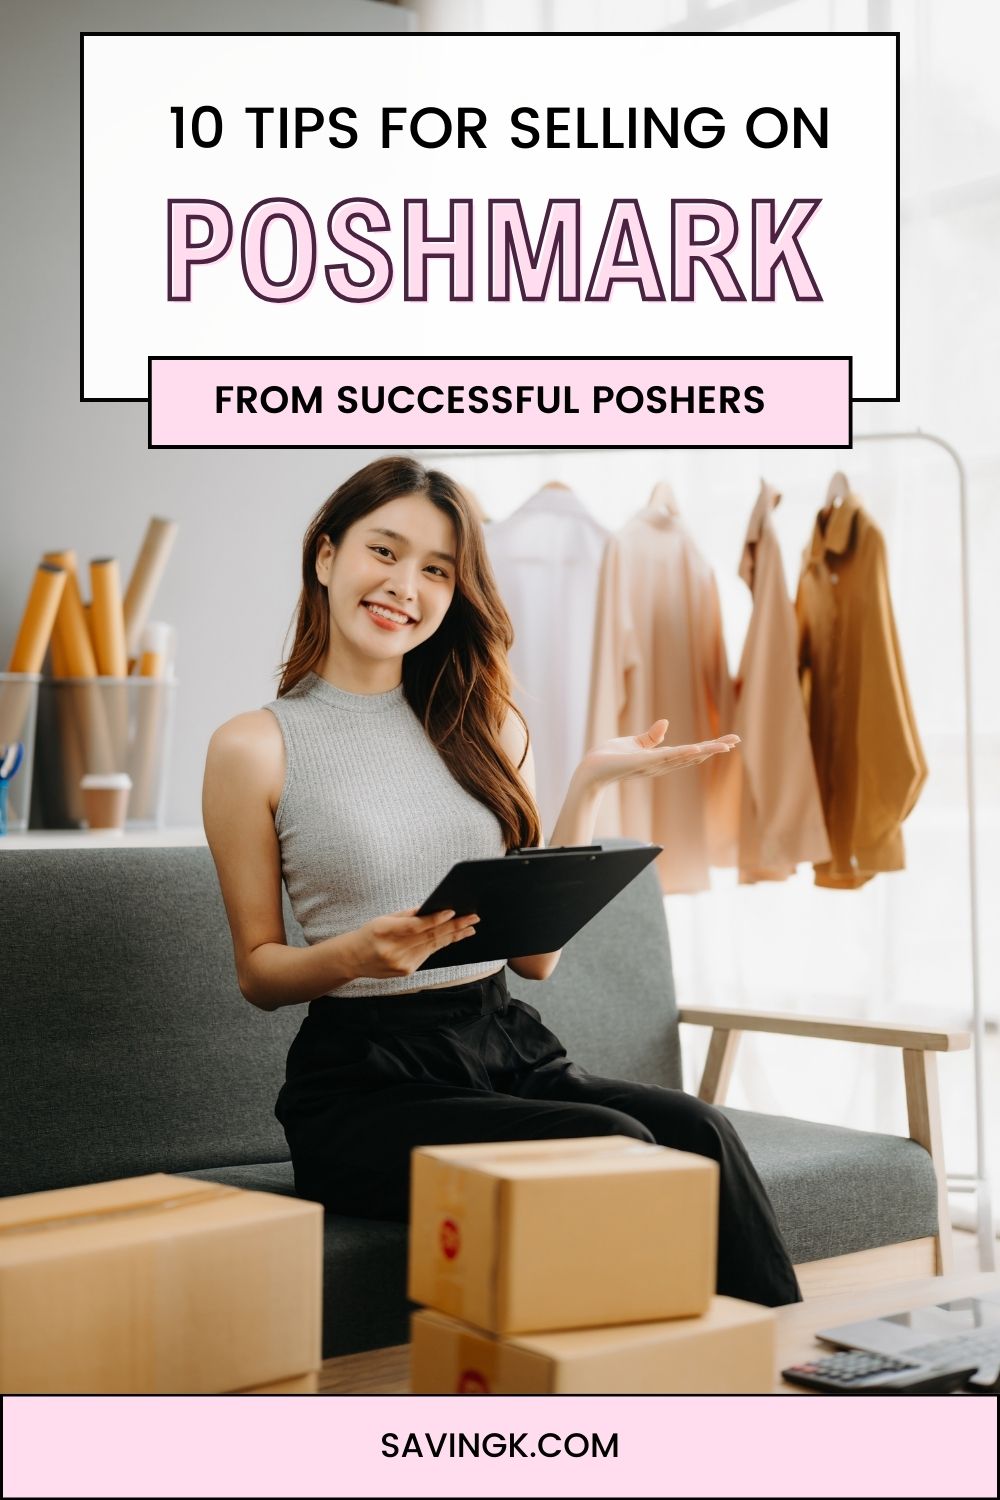 10 Tips for Successful Selling on Poshmark